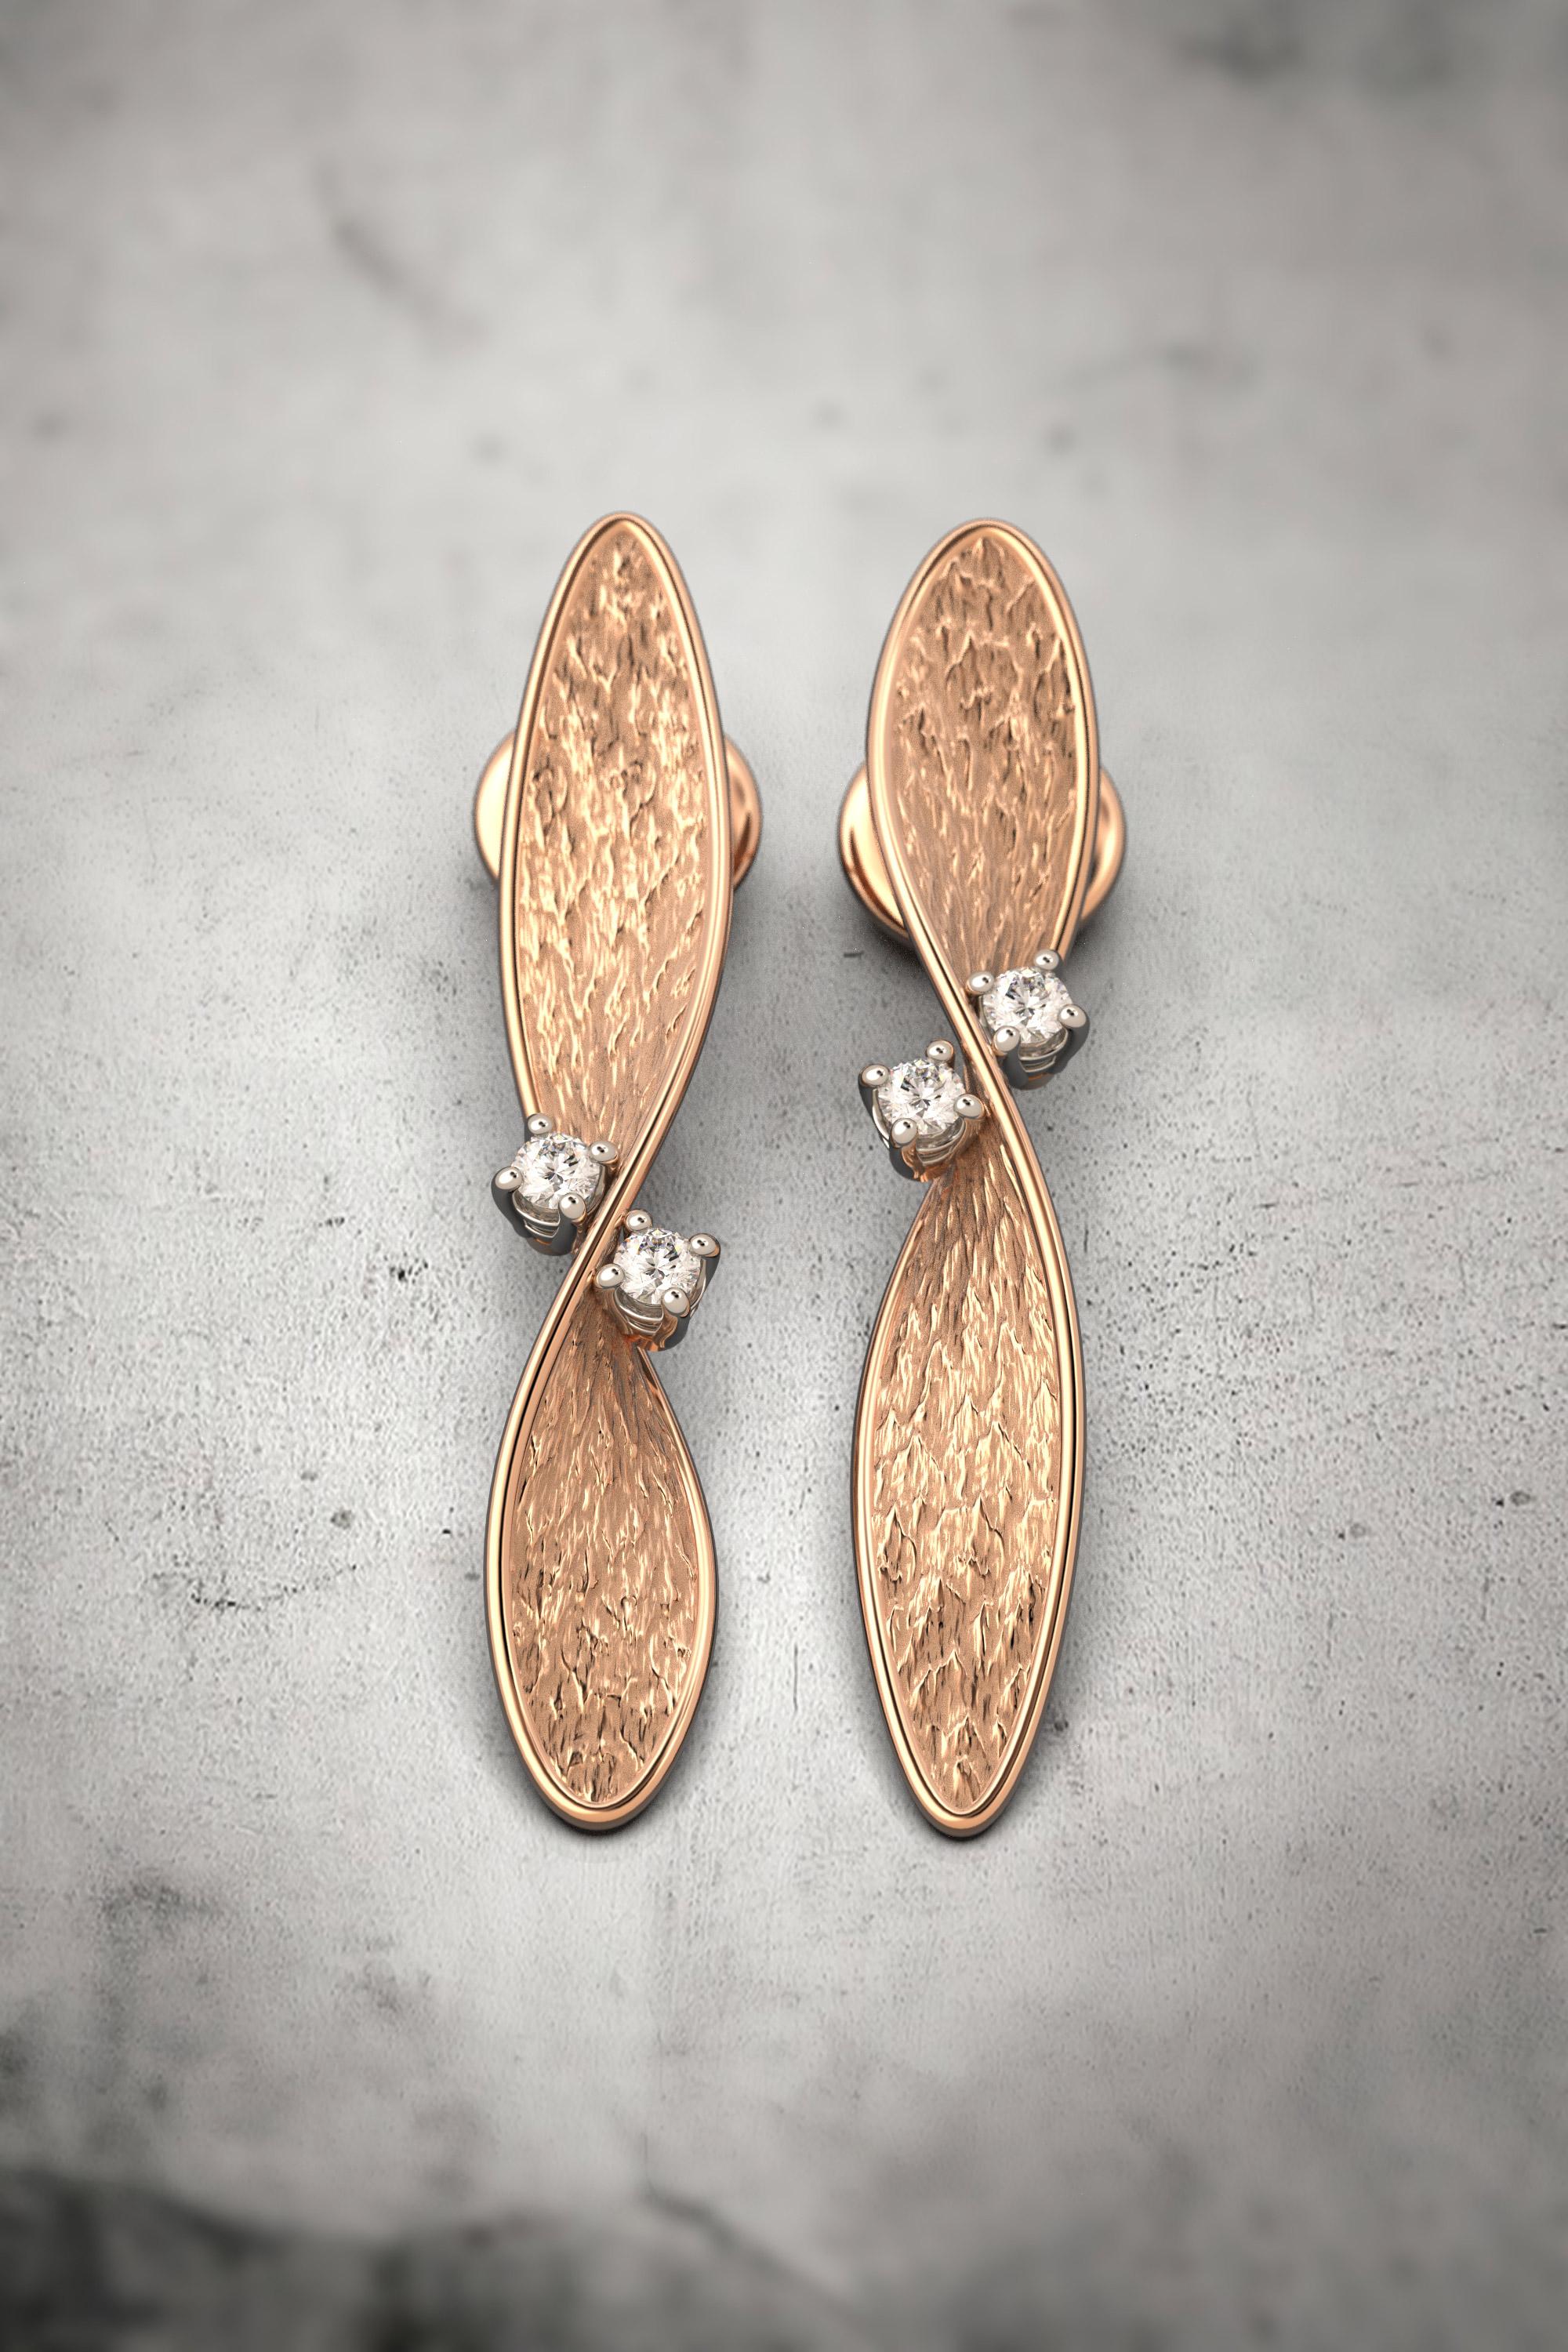 Brilliant Cut 18k Gold Diamond Earrings made in Italy by Oltremare Gioielli, Italian Jewelry. For Sale